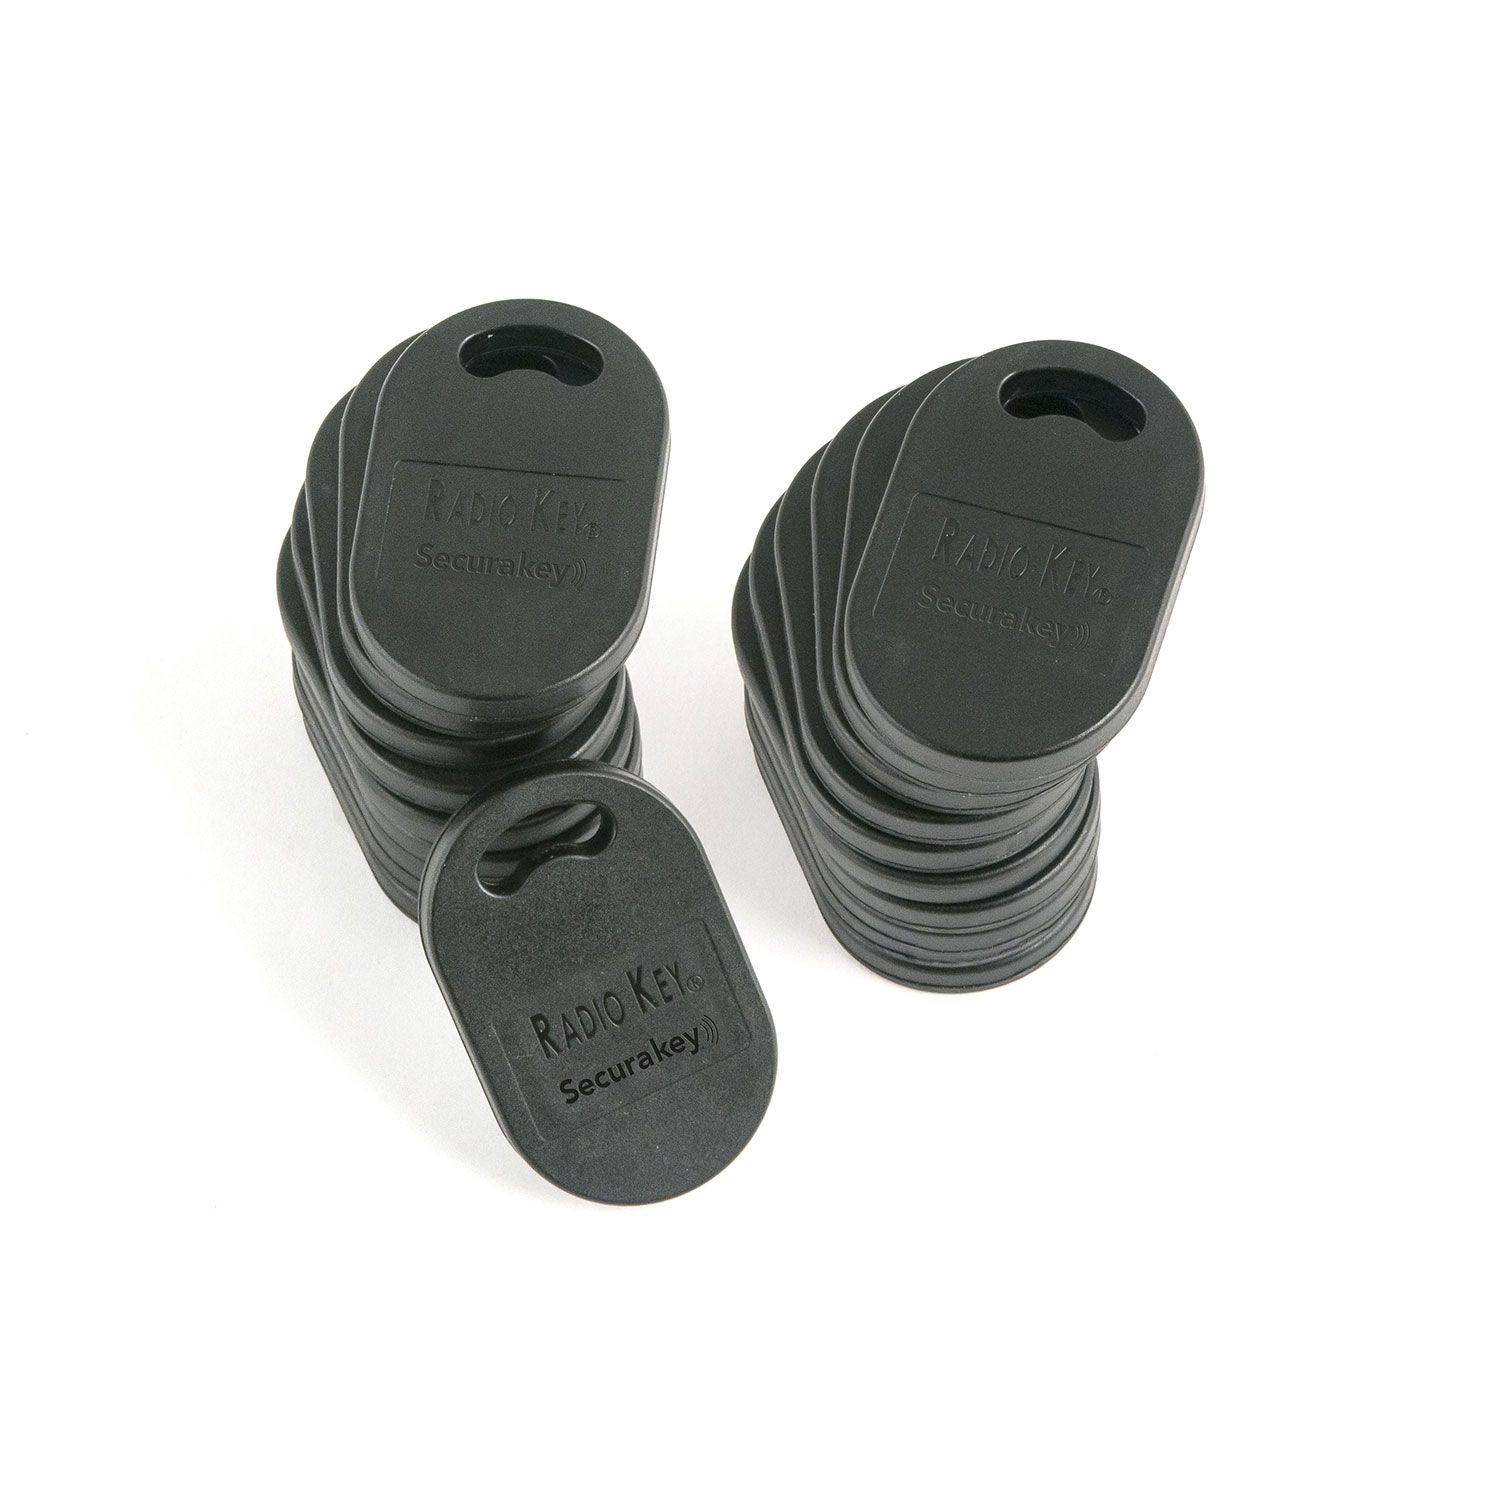 40-021 SecuraKey Readers Key Fob 100/Lot From Security Brands Inc.